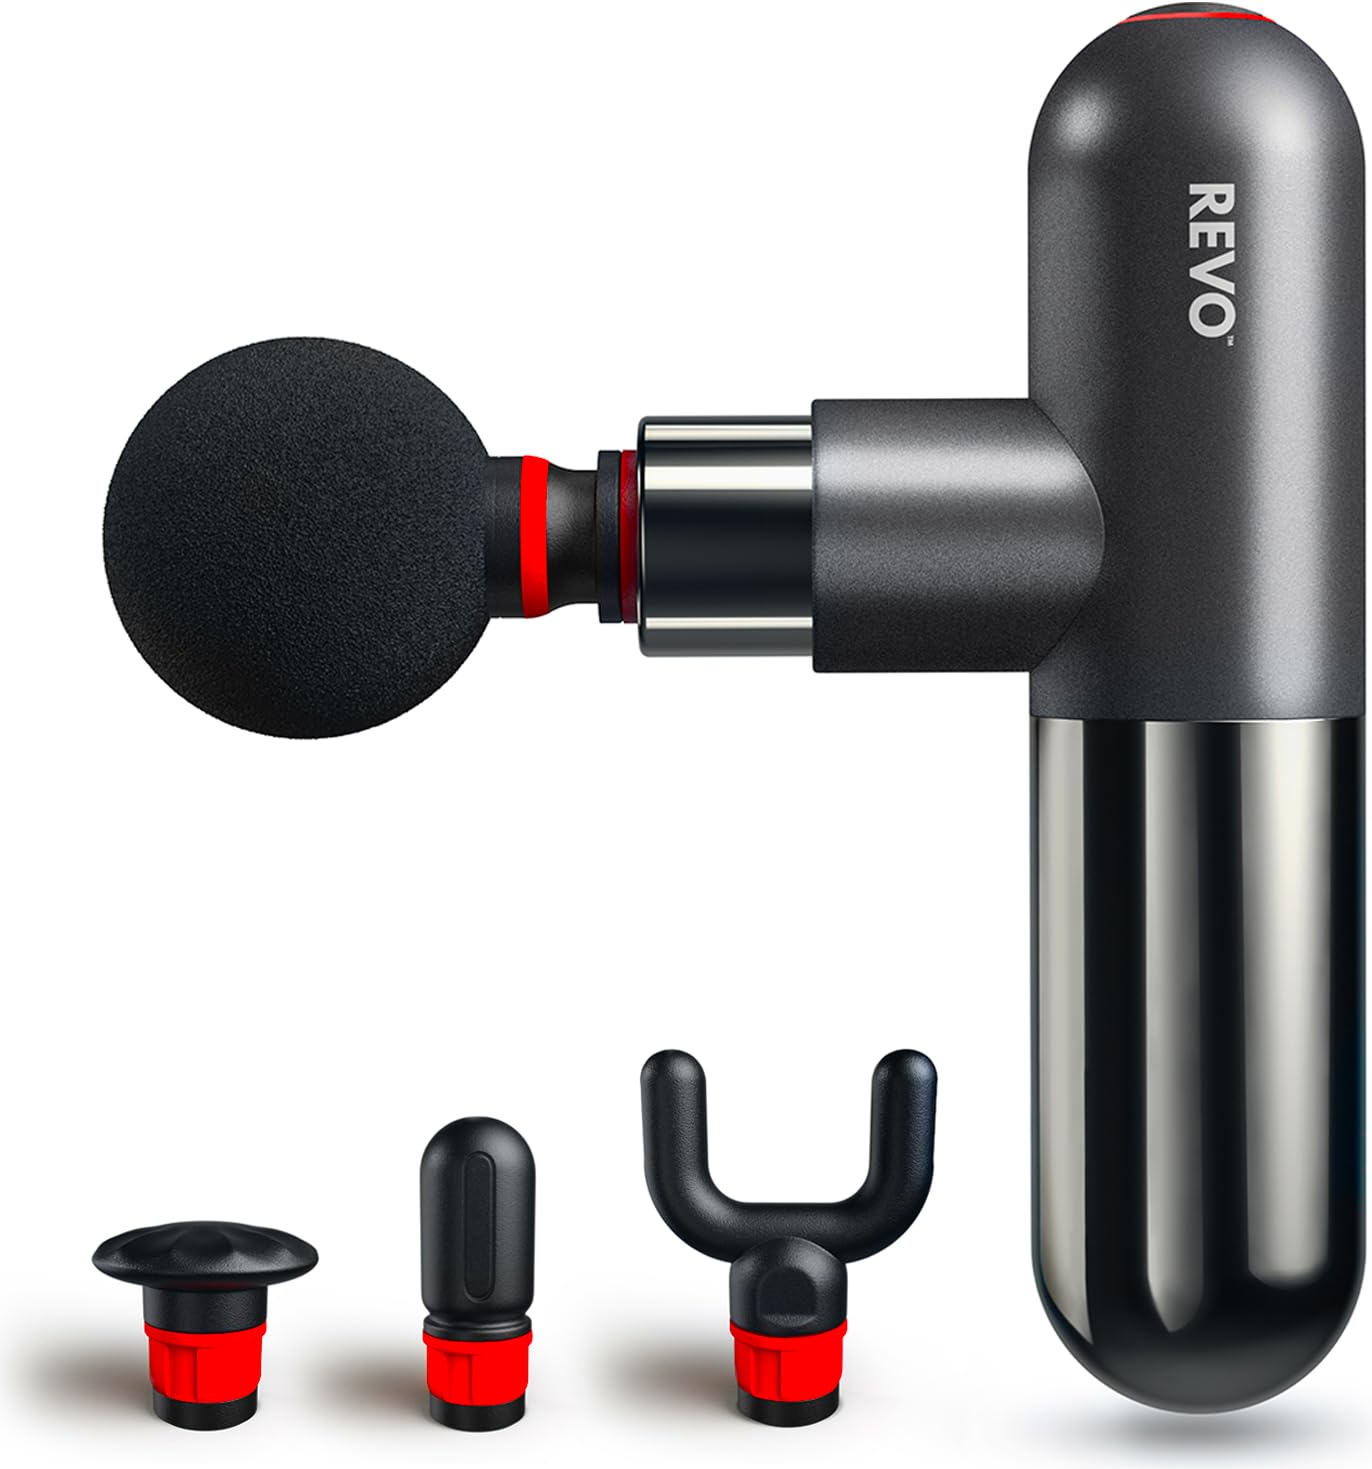 The Pill by REVO - Handheld Deep Tissue Electric Massage Gun with 4 Attachments - Powerful, Sleek, Ergonomic, Lightweight - Compact and Easy to Hold Percussion Muscle Massager